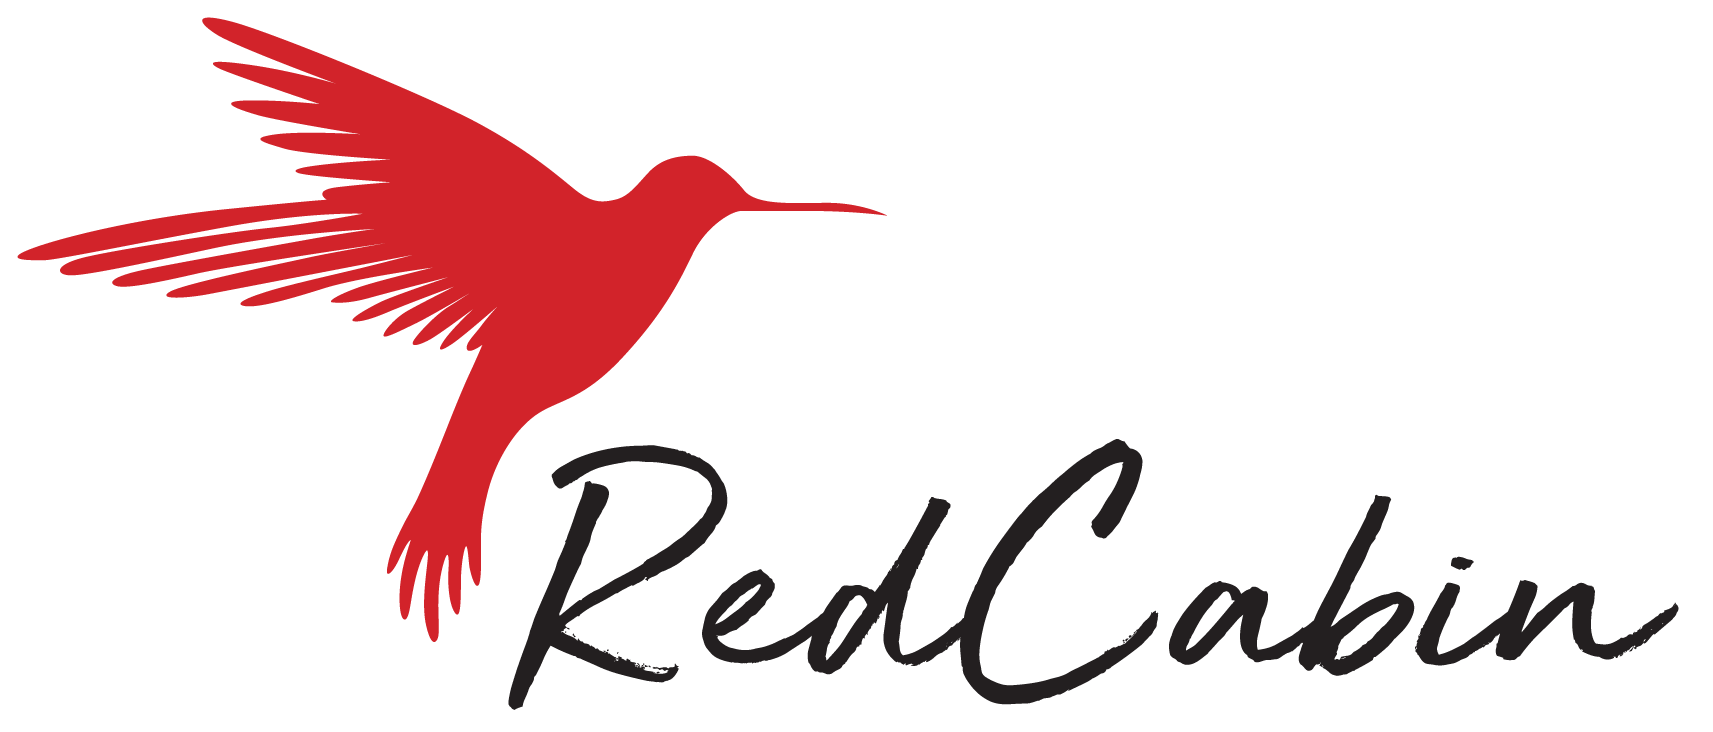 Logo PACE collaborates with RedCabin